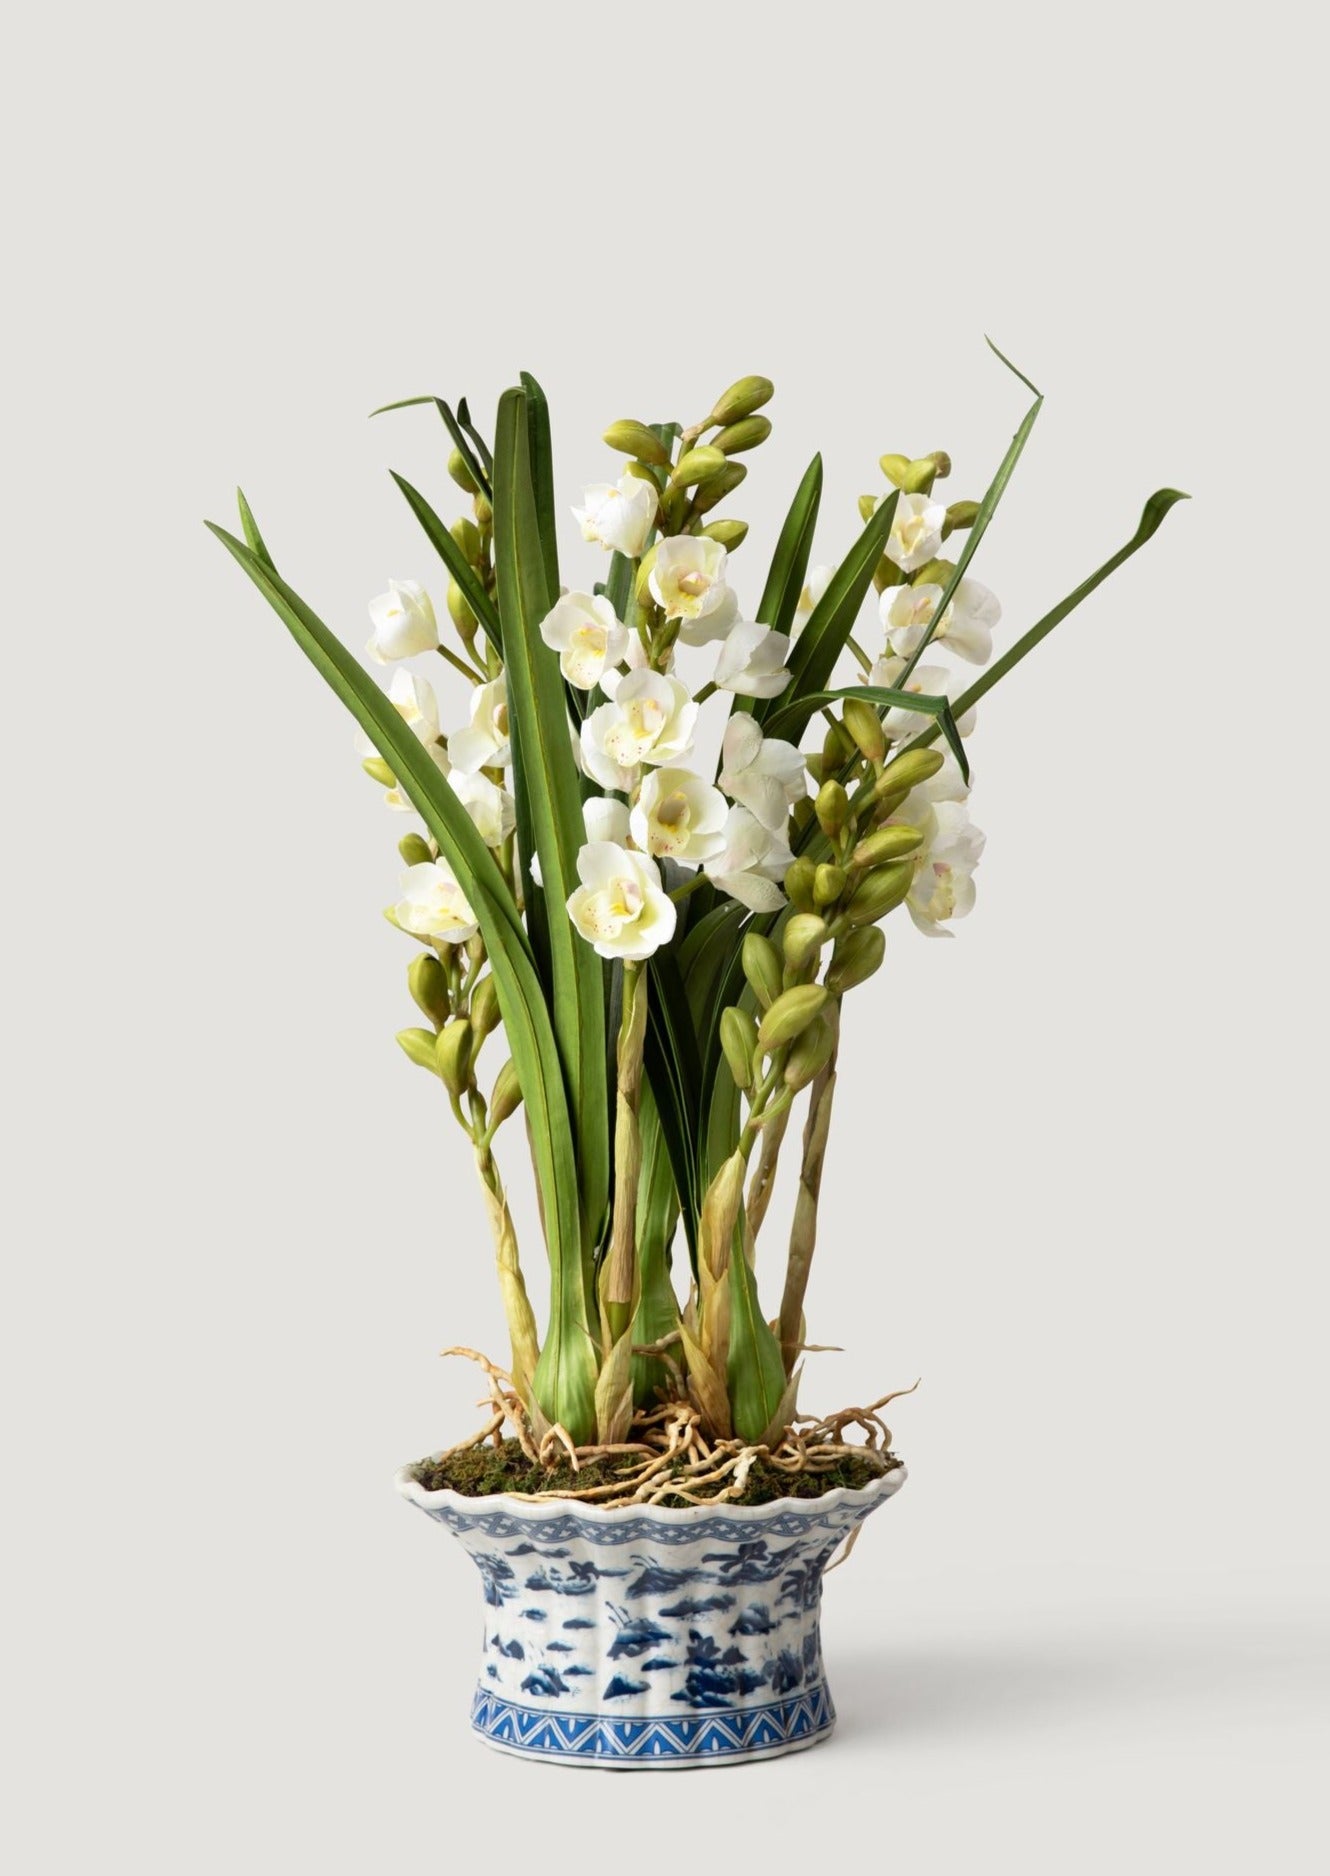 Faux Blooming Flowers Arrangement of White Orchids in Ceramic Pot